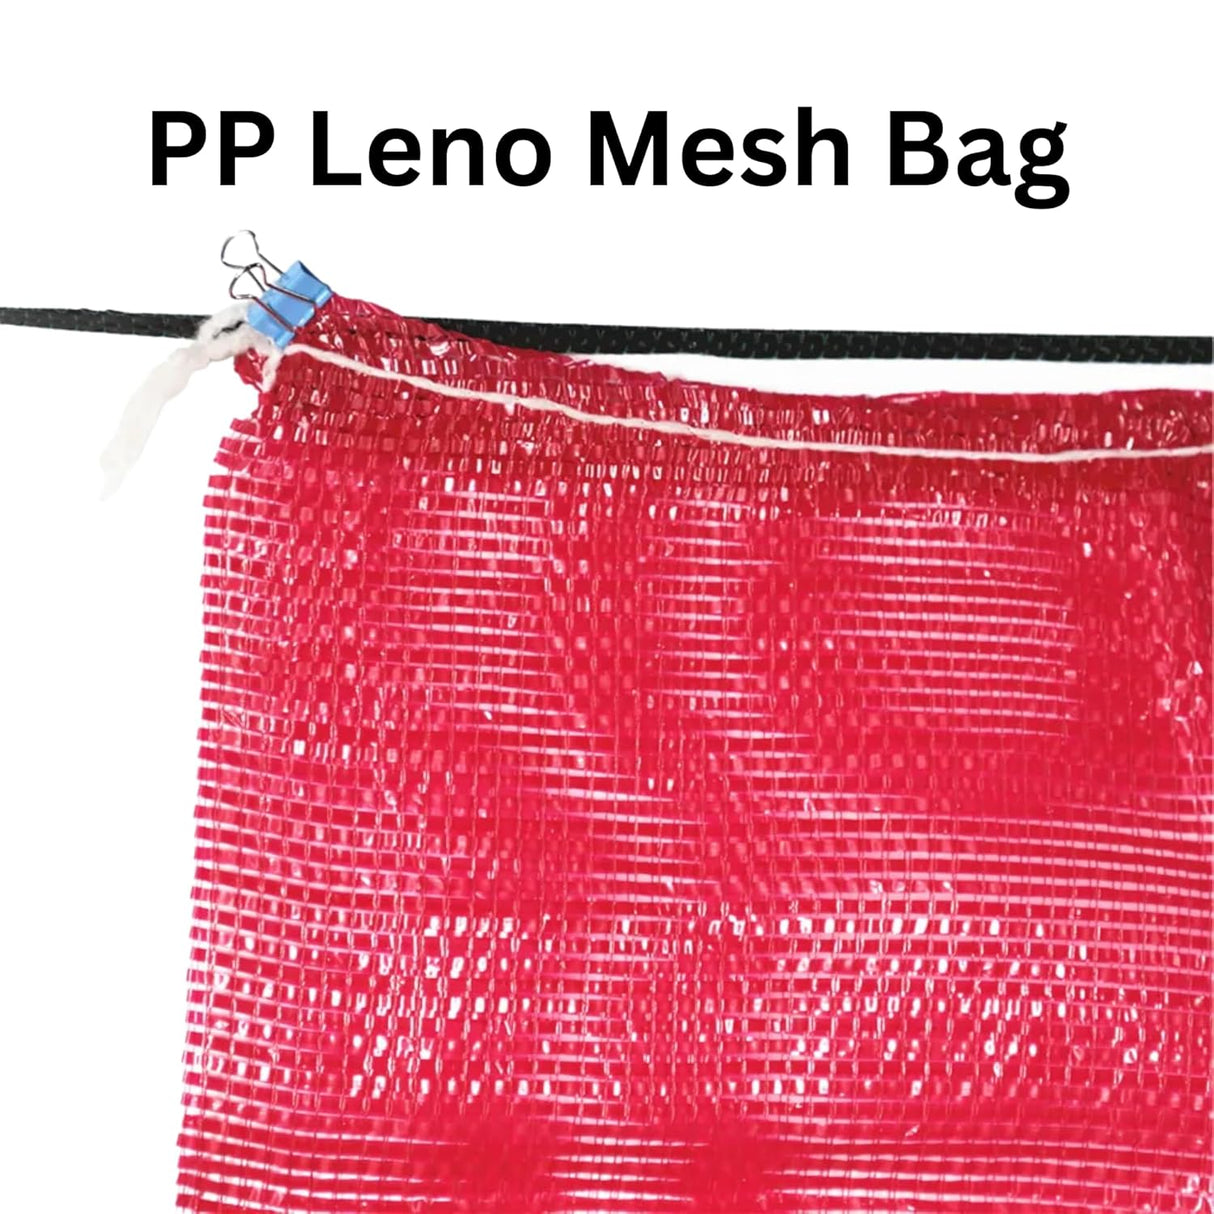 SINGHAL Leno Mesh Storage Produce Bags Reusable for Vegetable Storage Bags Onion Storage Washable Net Bags (14x26 Inch - Yellow, 25)